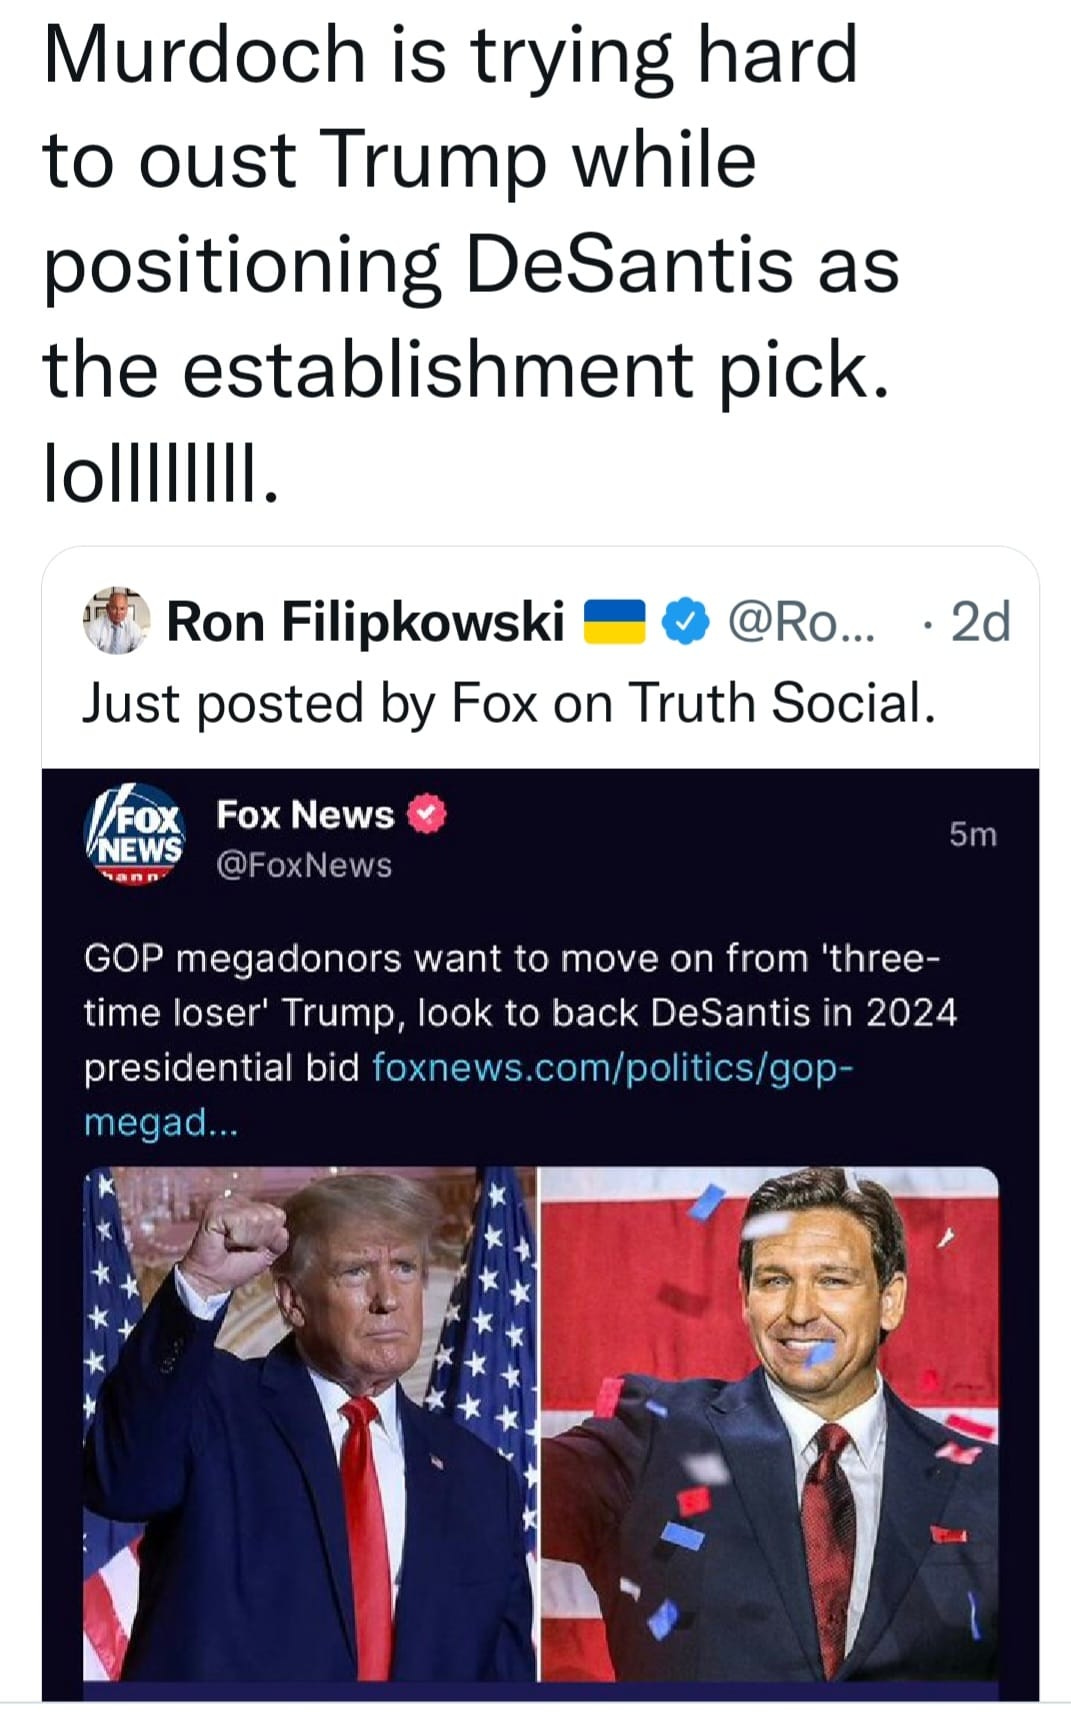 May be a Twitter screenshot of 2 people and text that says 'Murdoch is trying hard to oust Trump while positioning DeSantis as the establishment pick. lolllil. Ron Filipkowski @Ro... 2d Just posted by Fox on Truth Social. FOX Fox News NEWS @FoxNews 5m GOP megadonors want to move on from 'three- time loser' Trump, look to back DeSantis in 2024 presidential bid foxnews.com/politics/gop megad...'